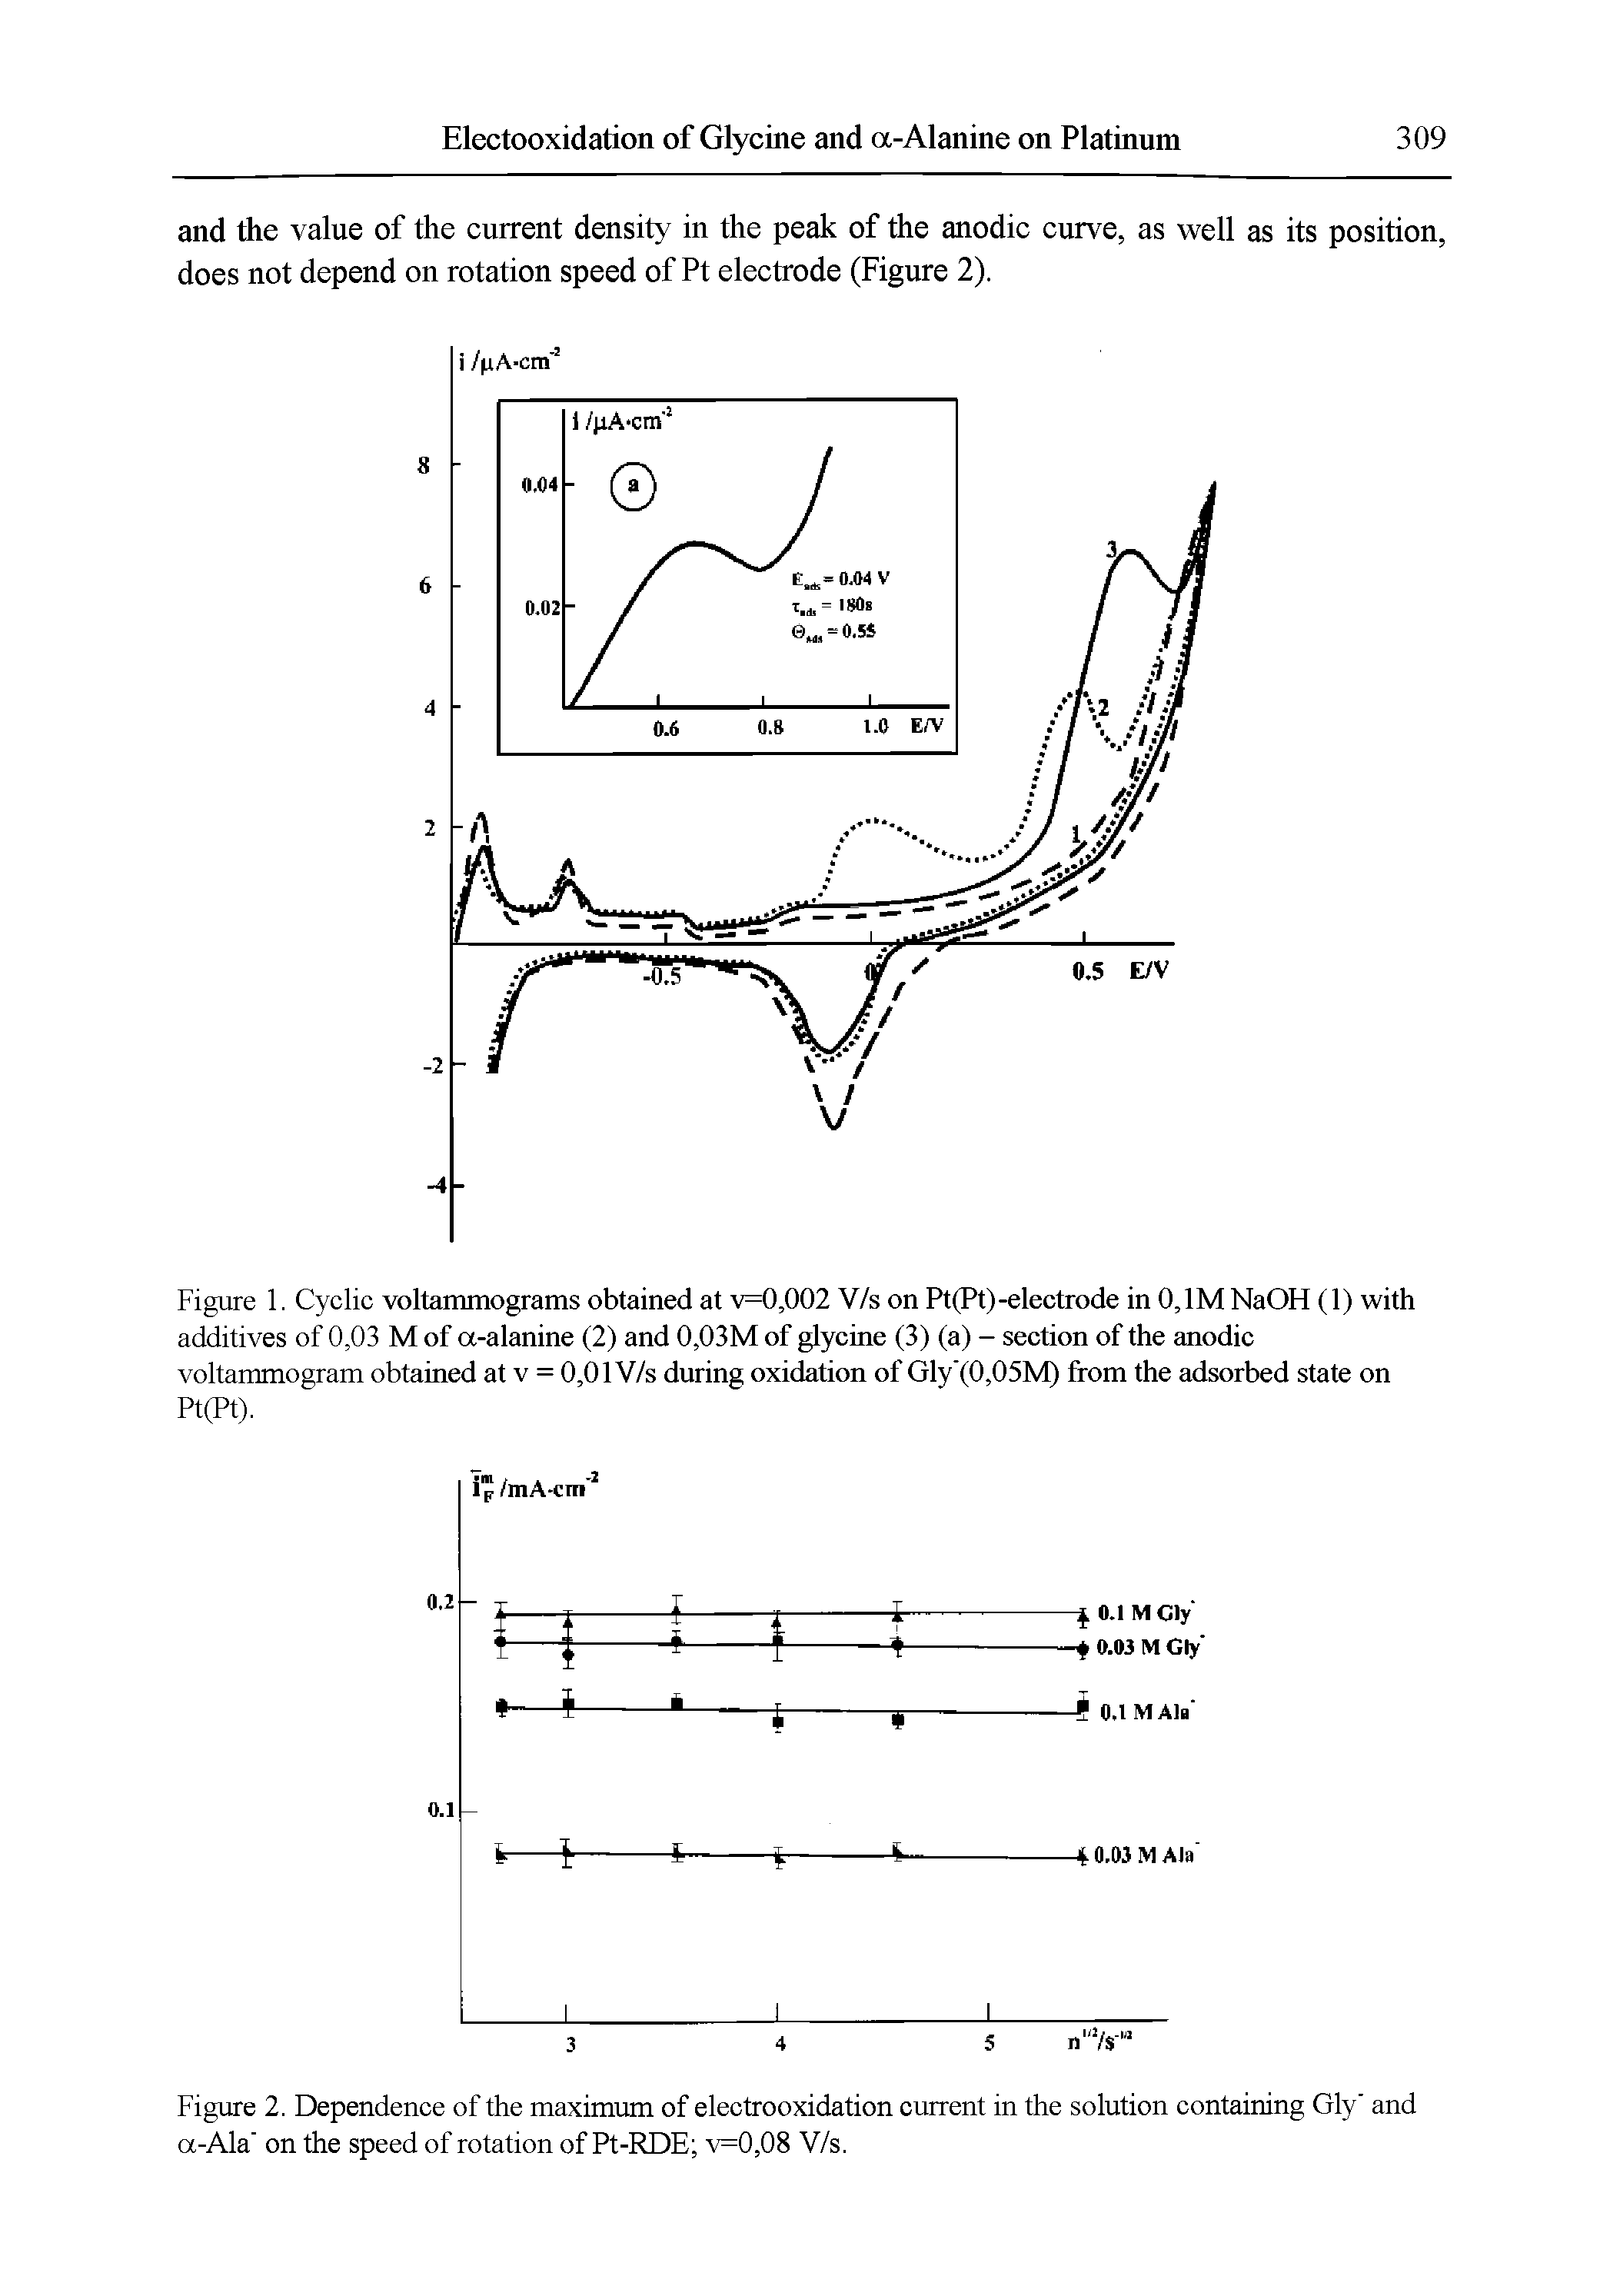 Figure 1. Cyclic voltammograms obtained at v=0,002 V/s on Pt(Pt)-electrode in 0,1M NaOH (1) with additives of 0,03 M of a-alanine (2) and 0,03M of glycine (3) (a) - section of the anodic voltammogram obtained at v = 0,01 V/s during oxidation of Gly (0,05M) from the adsorbed state on...